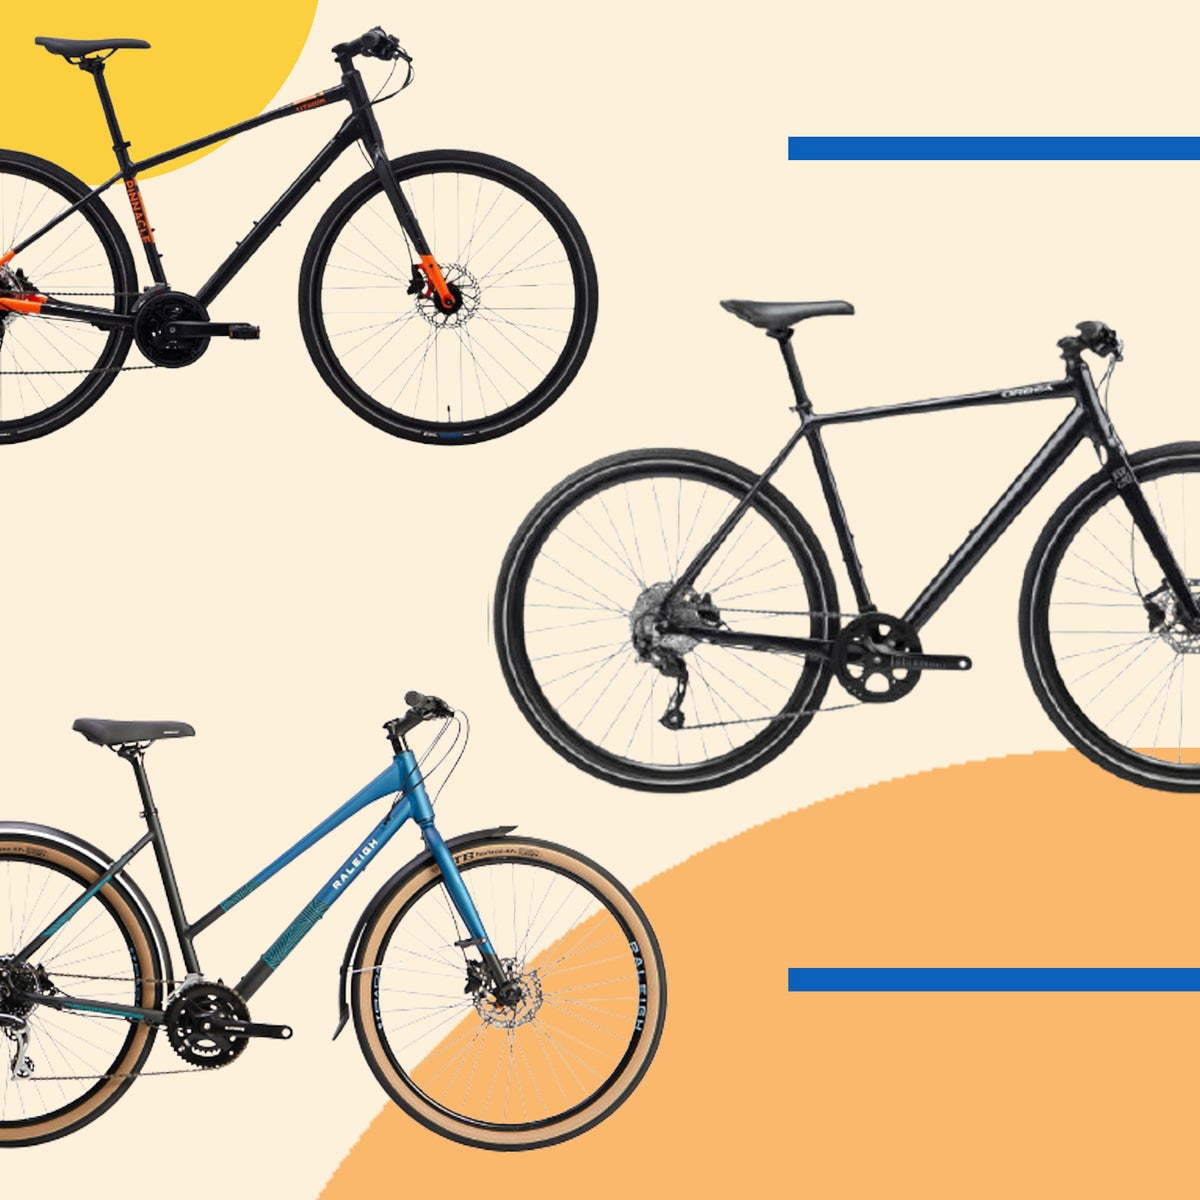 The Ultimate Guide to Hybrid Bikes: How Much Does a Good One Cost? Upgrades and repairs